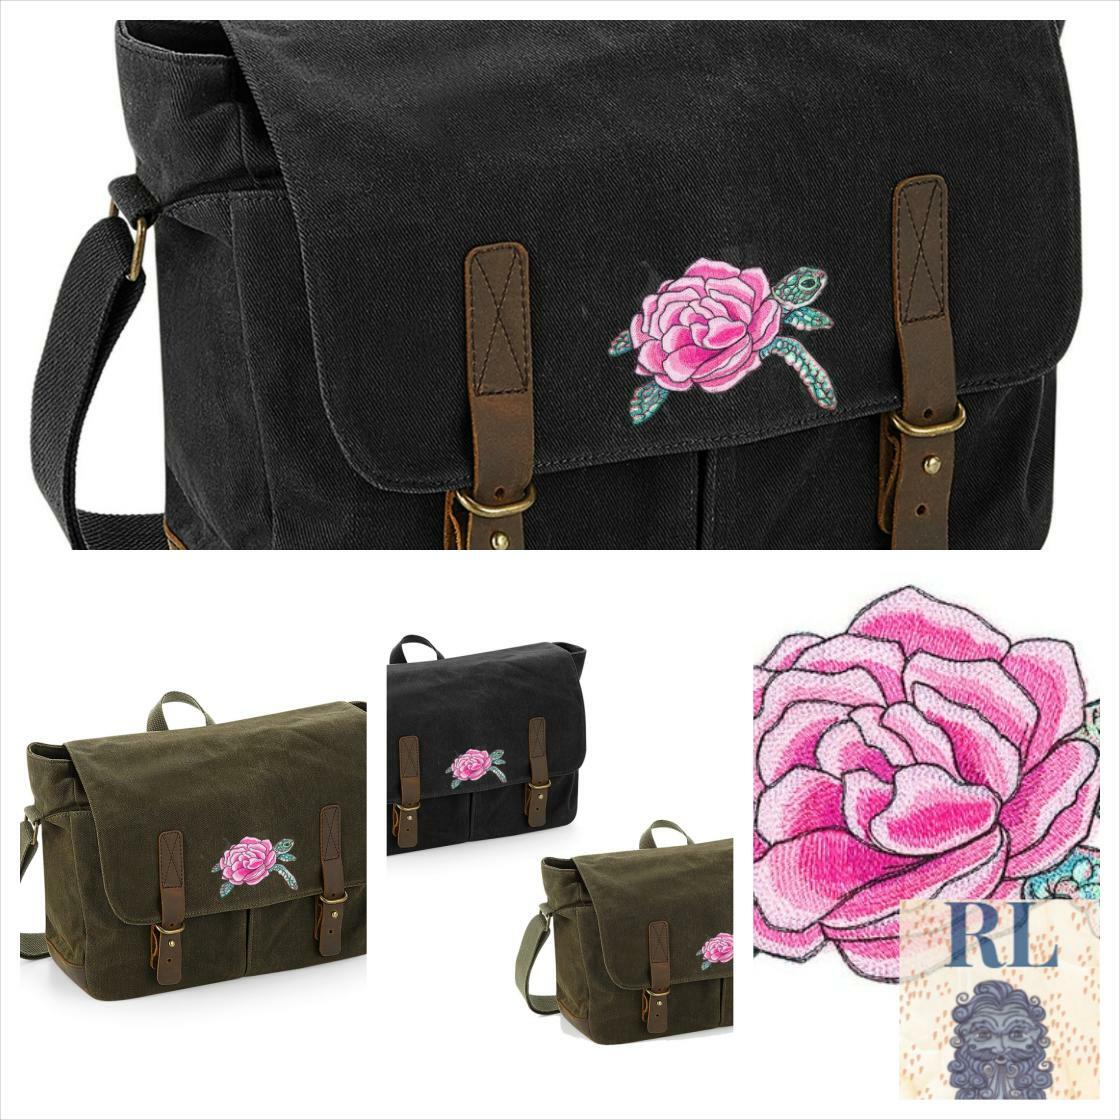 #CanvasLaptopBag #LaptopBag Heritage Waxed Canvas Laptop Bag Embroidered With a 'Floral Sea Turtle' design - available in Black or Olive Green
etsy.com/listing/965954…